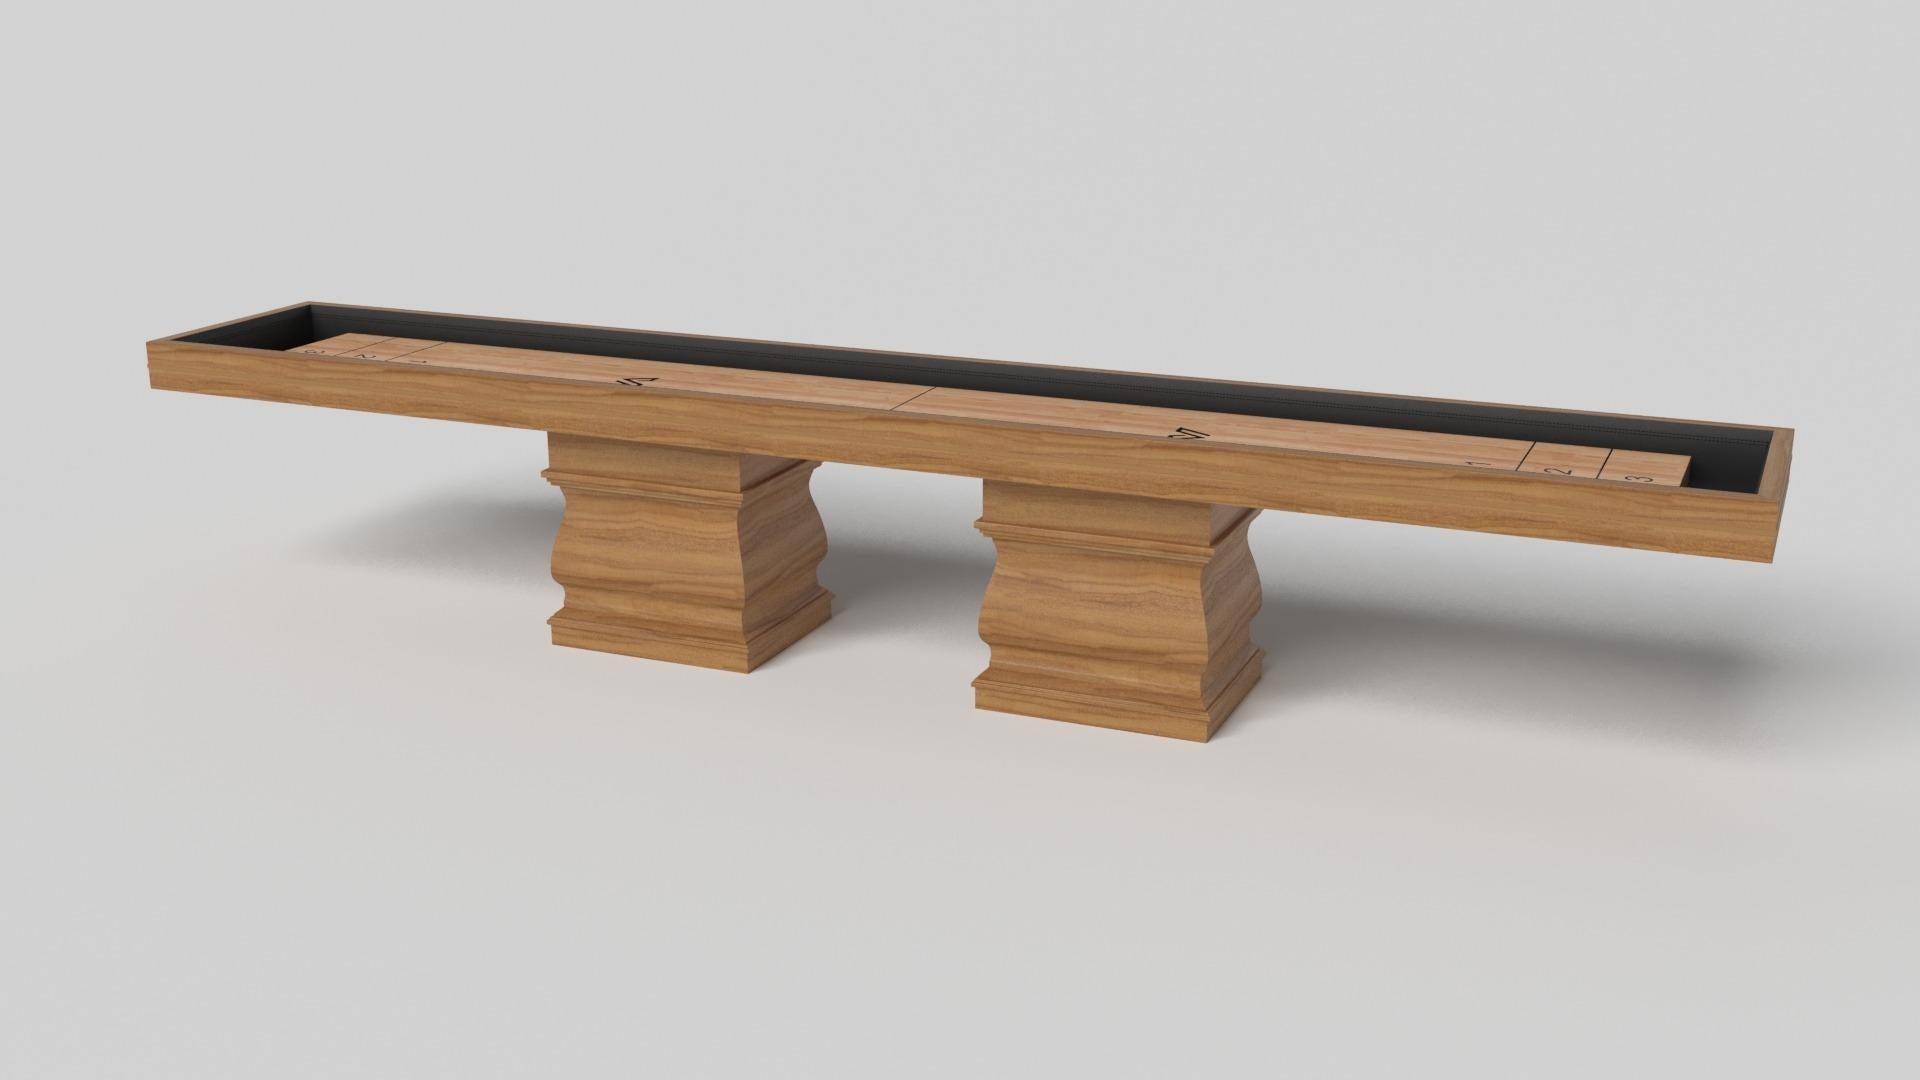 Two hand-sculpted legs bestow a sense of classic style upon this handcrafted shuffleboard table in white. This luxury wood game table features a smooth rectangular top perched upon two wide baluster column legs that mimic the curves and lines of